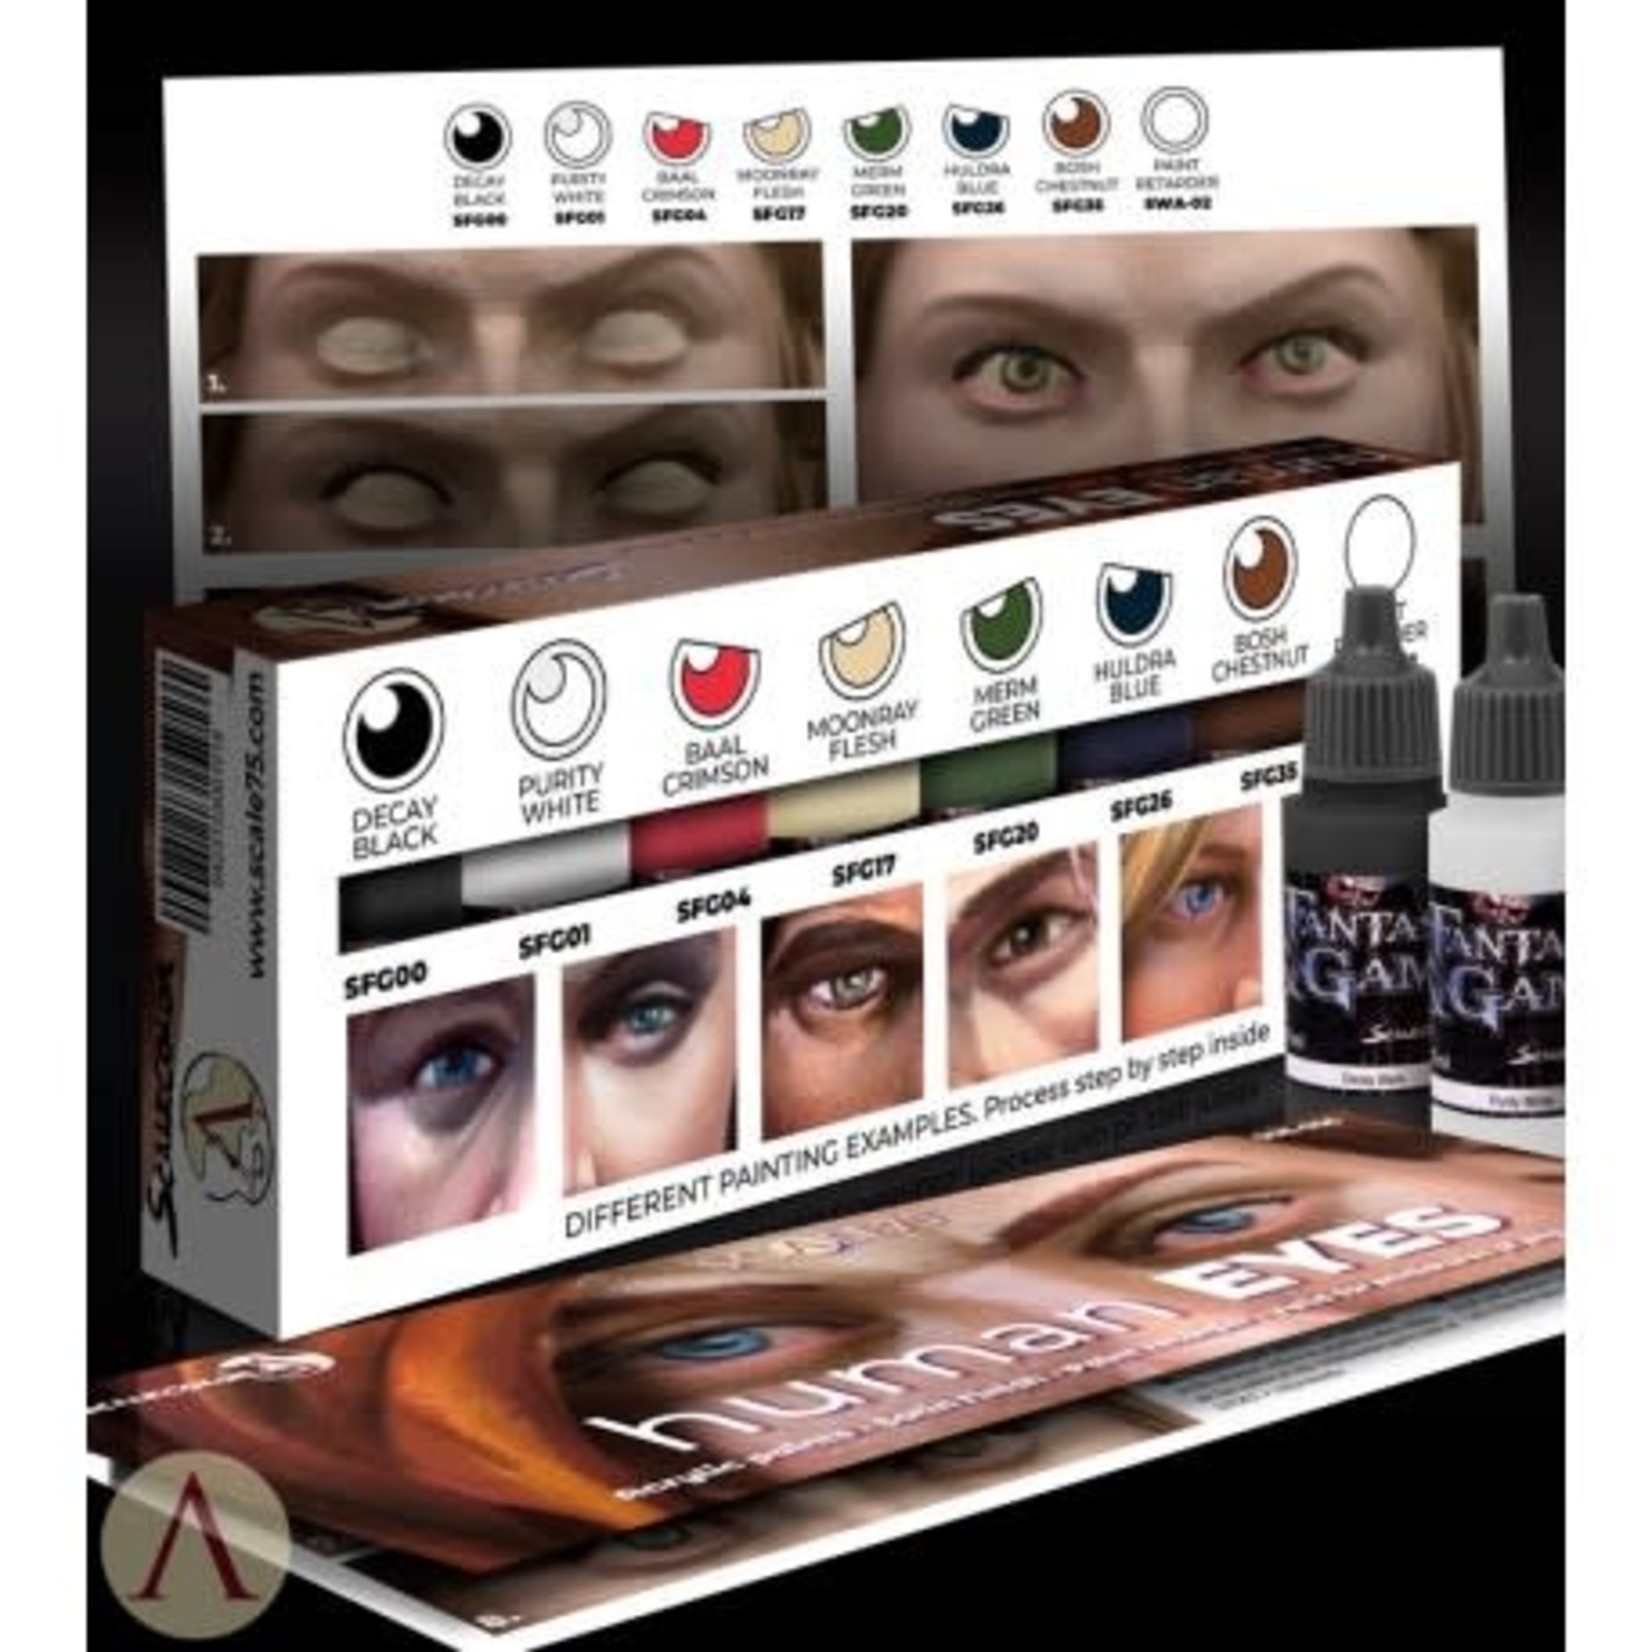 Scale 75 Fantasy and Games SSE056 Human Eyes Paint (8) Set